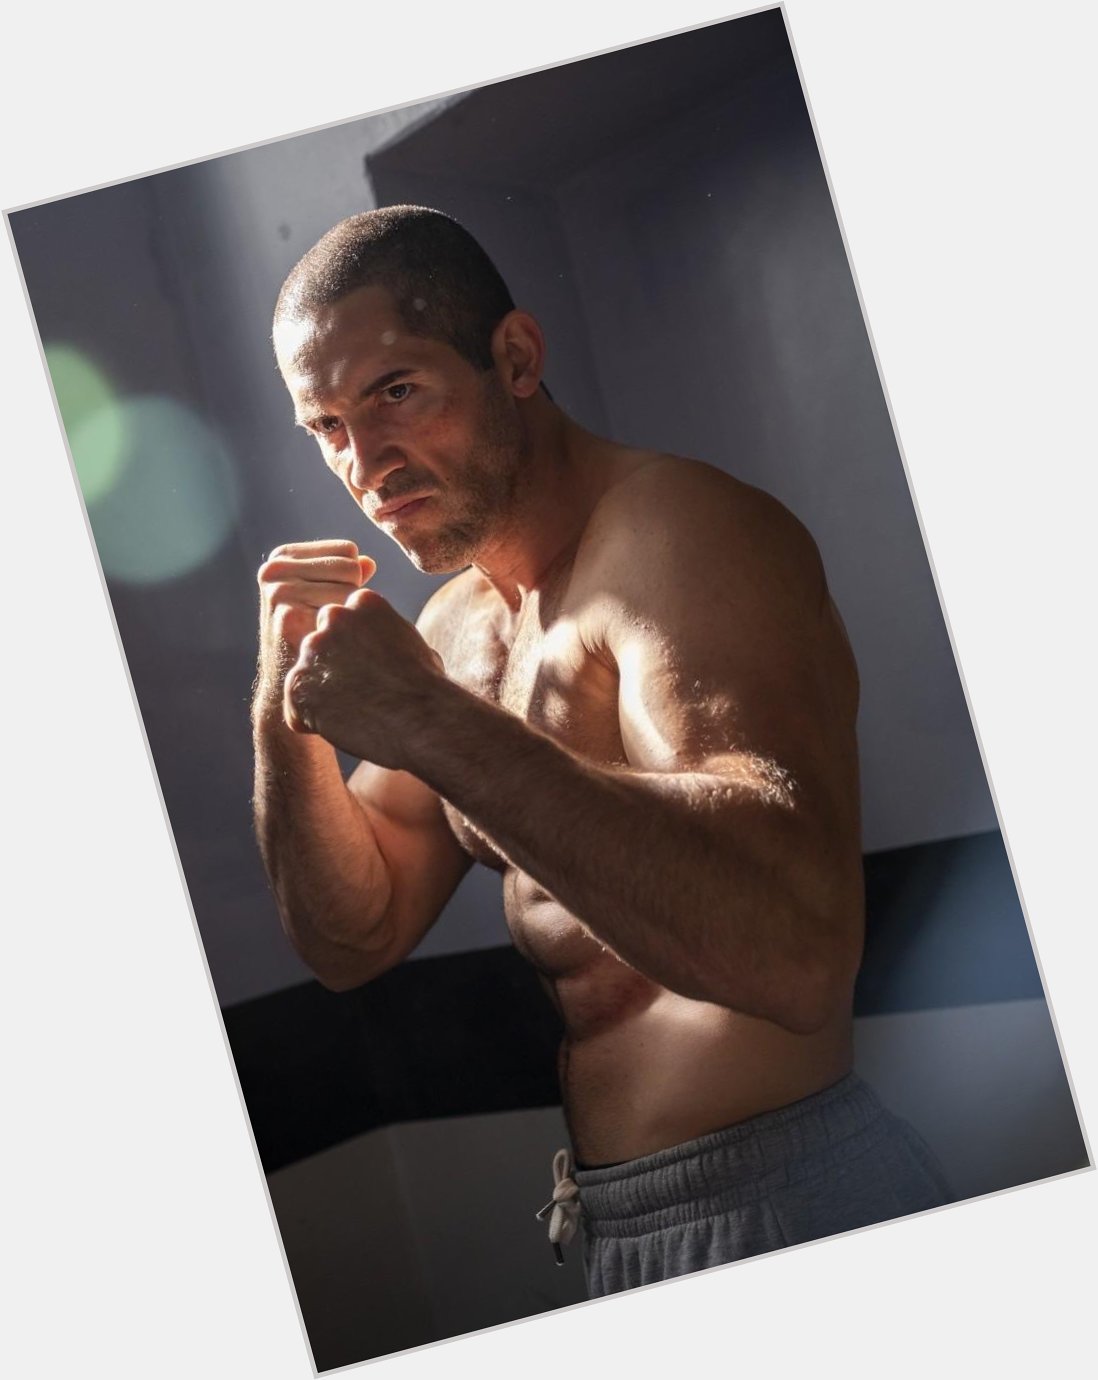 Happy Birthday to the Action Legend. Scott Adkins Sir! Best wishes from India. 